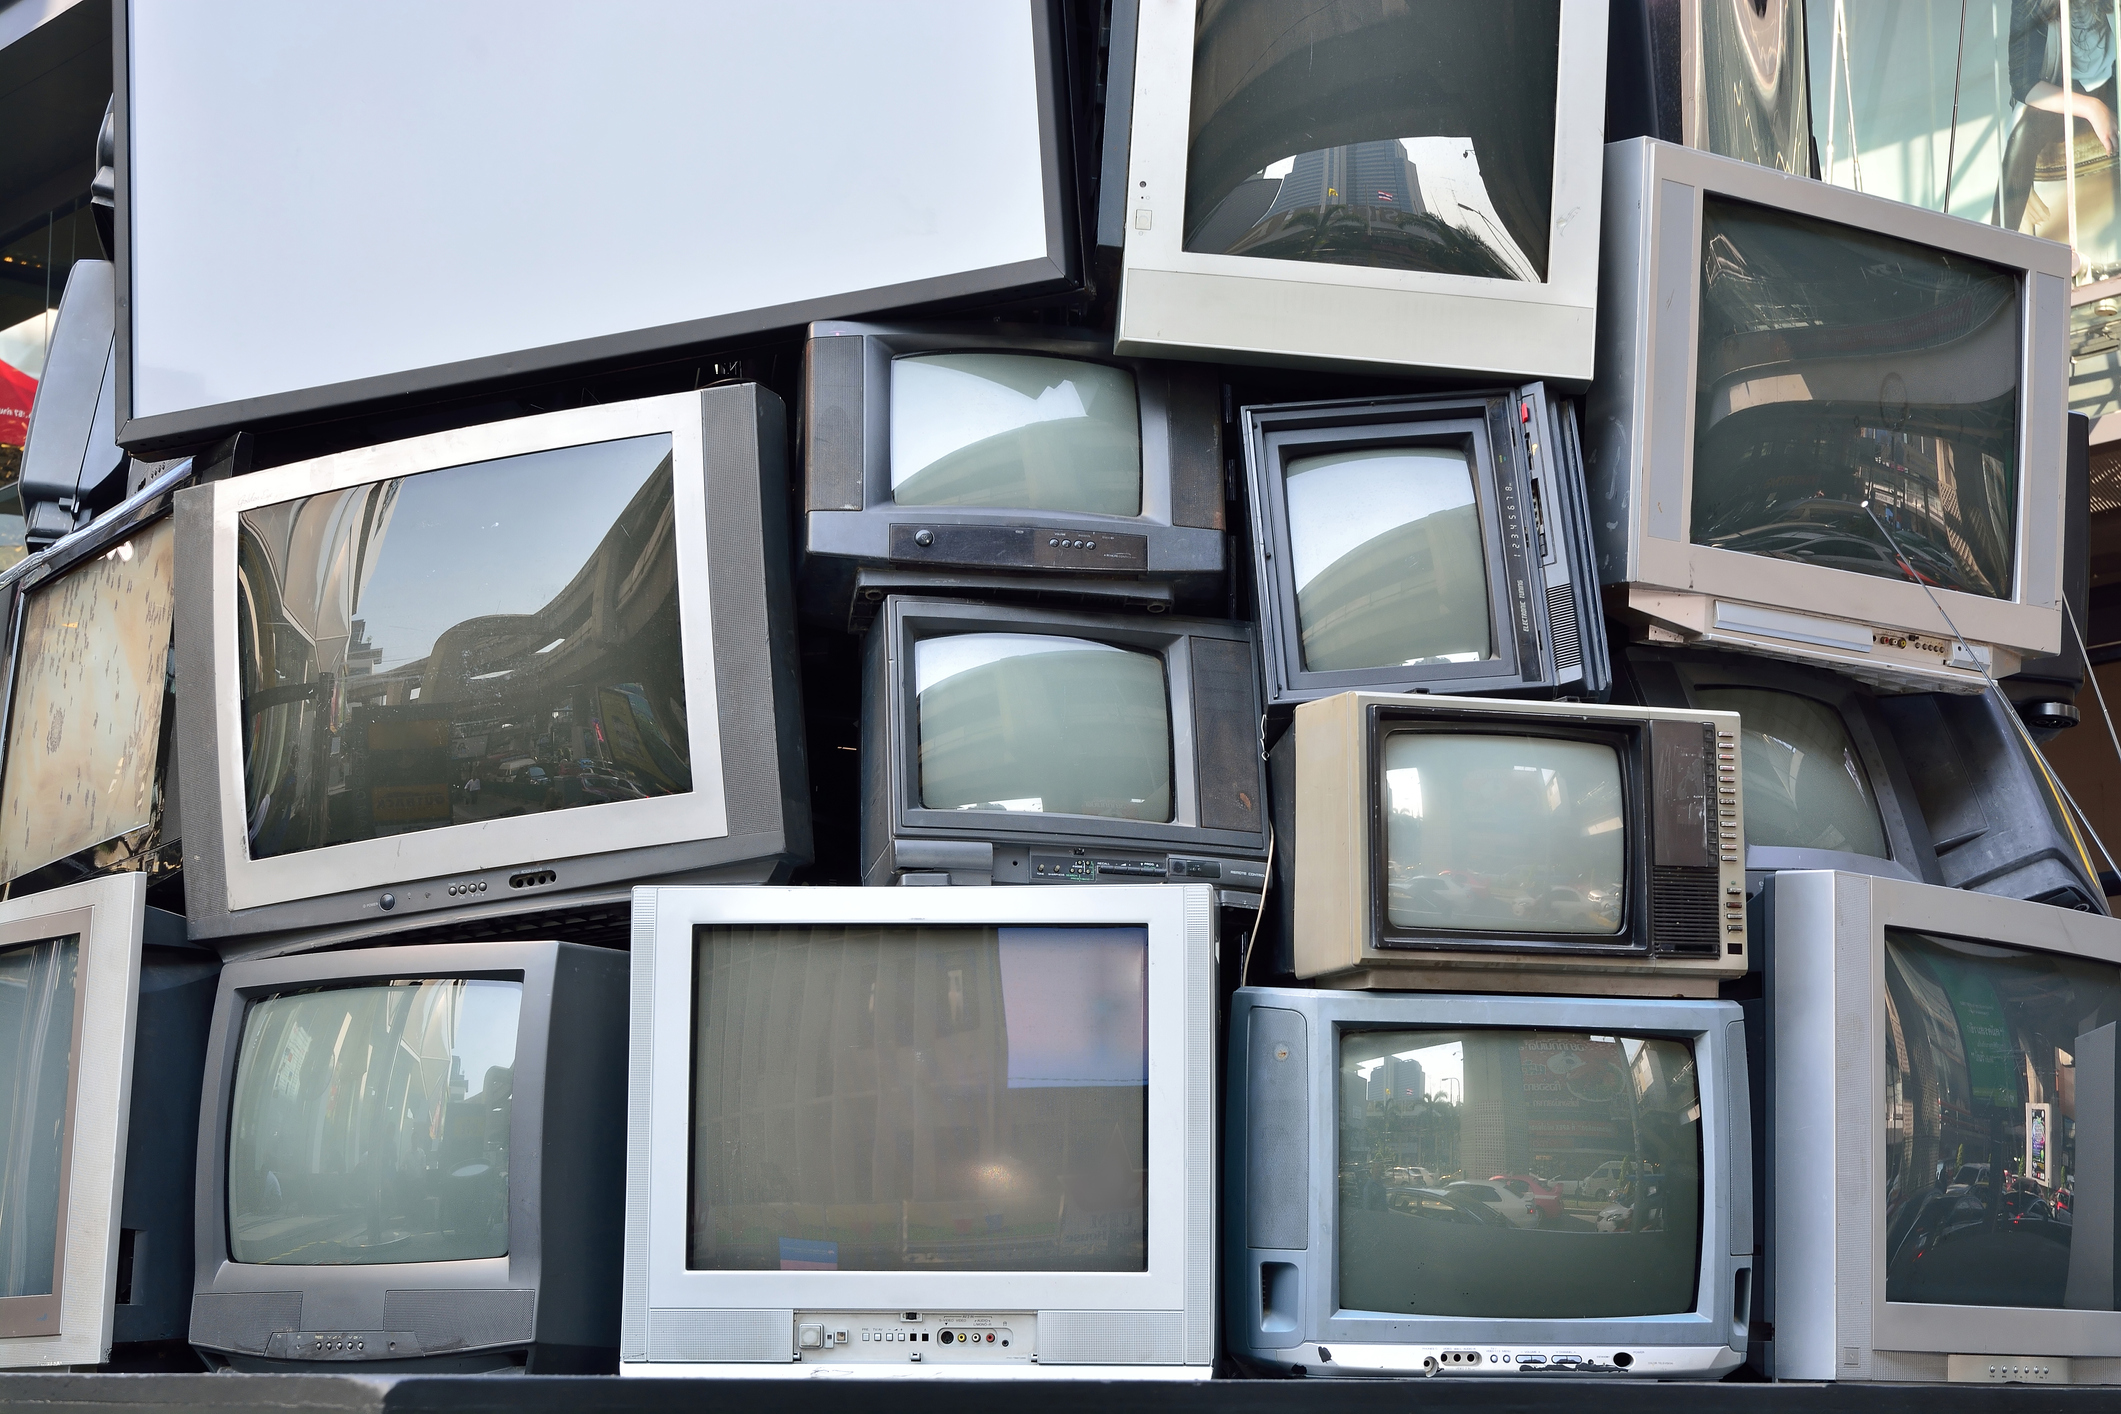 Stack or pile of CRT Display Television or TV